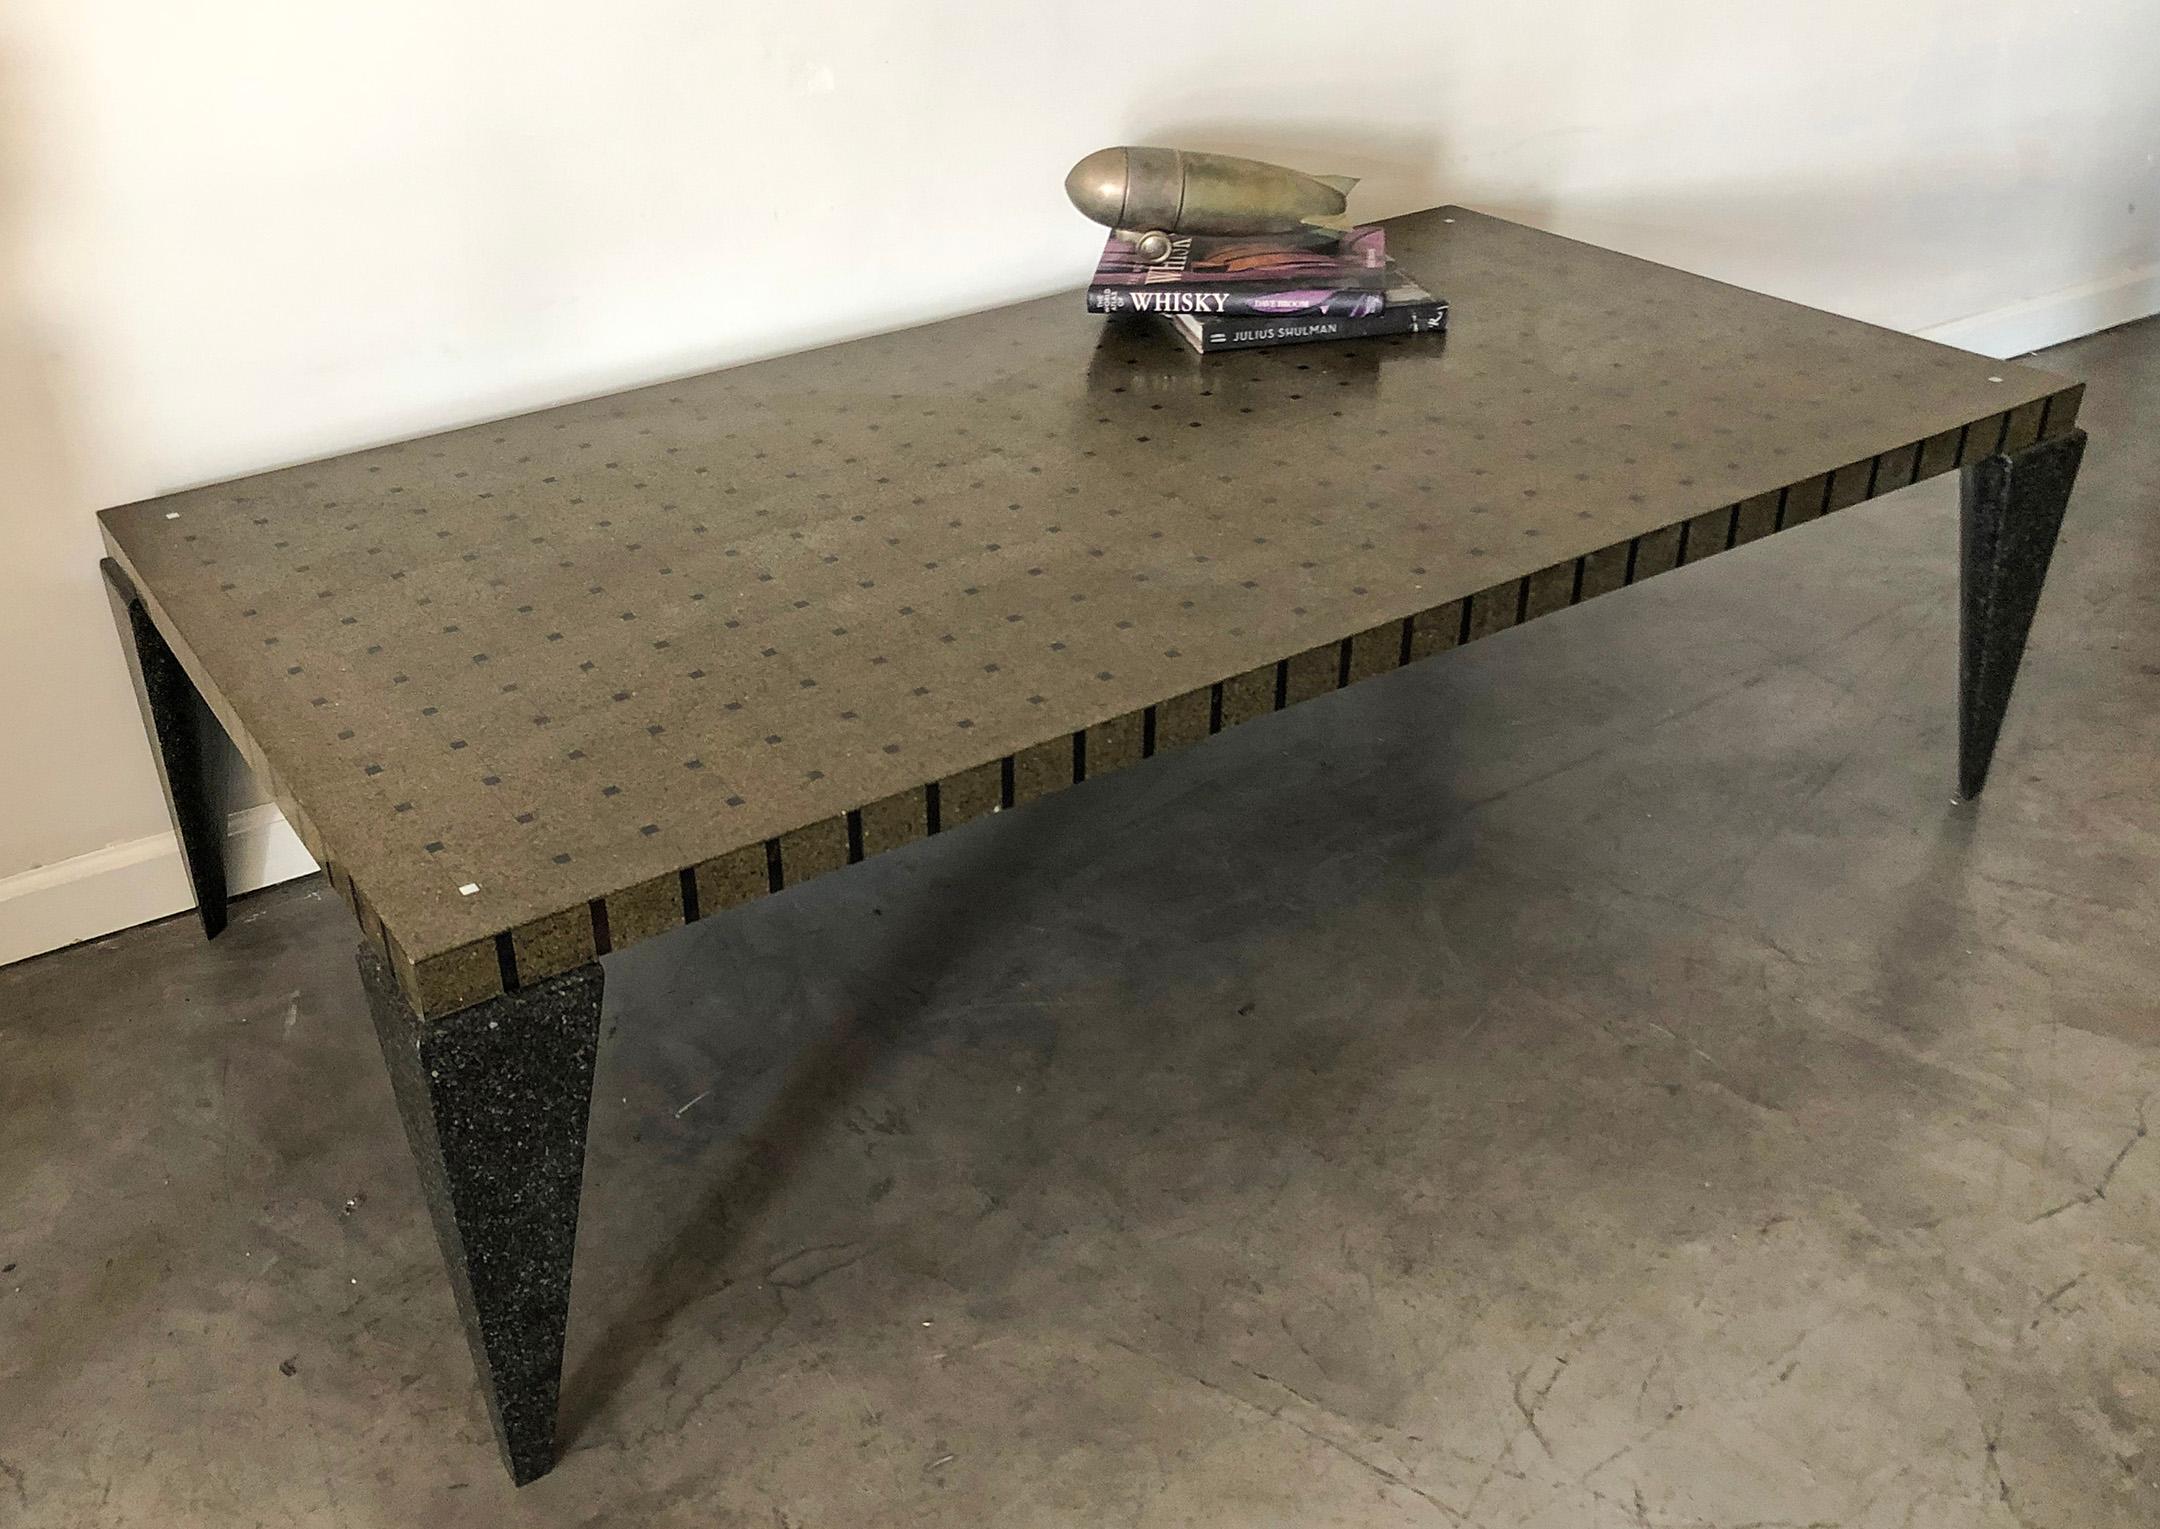 This table is stunning! With flecks of brass throughout the terrazzo of this coffee table, it brings a sparkle that balances the masculinity of this post-modern styled coffee table. Each corner of the table features black sea penshell inlay, as well